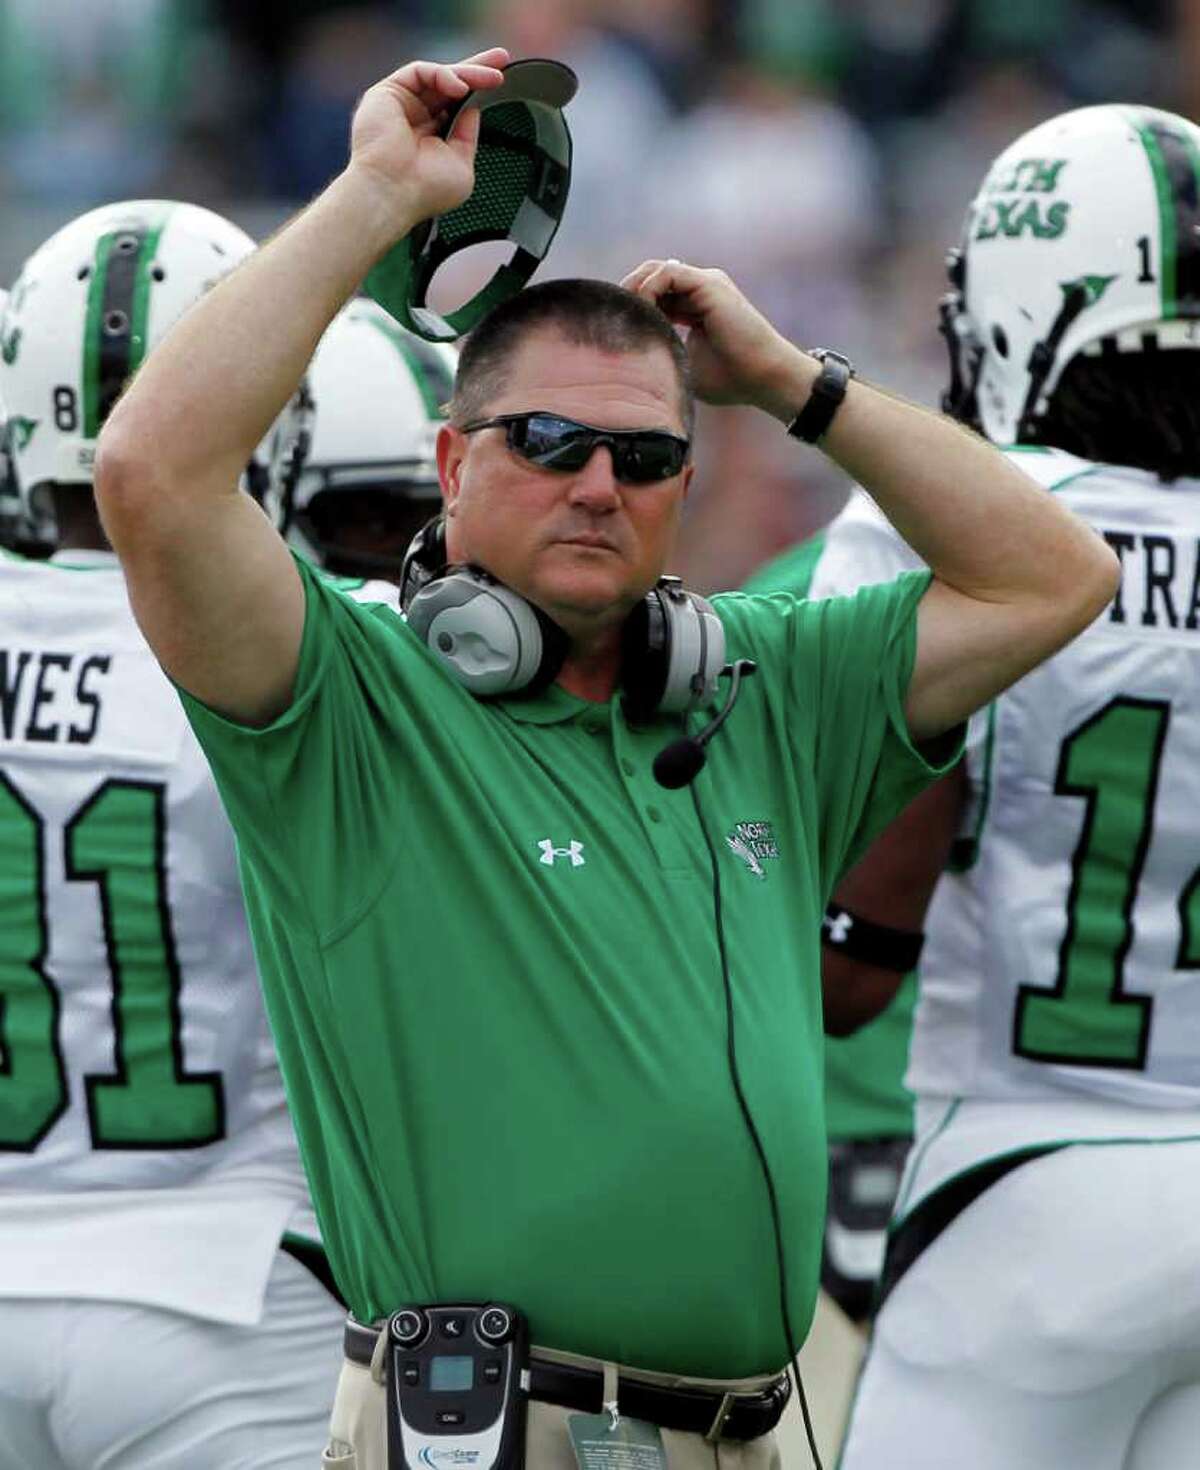 This Sept. 18, 2010, file photo shows North Texas head coach Todd Dodge during a time out in the first half of an NCAA college football game against Army, in West Point, N.Y. North Texas has fired coach Dodge after 3 1/2 unsuccessful seasons. (AP Photo/Mike Groll, File)